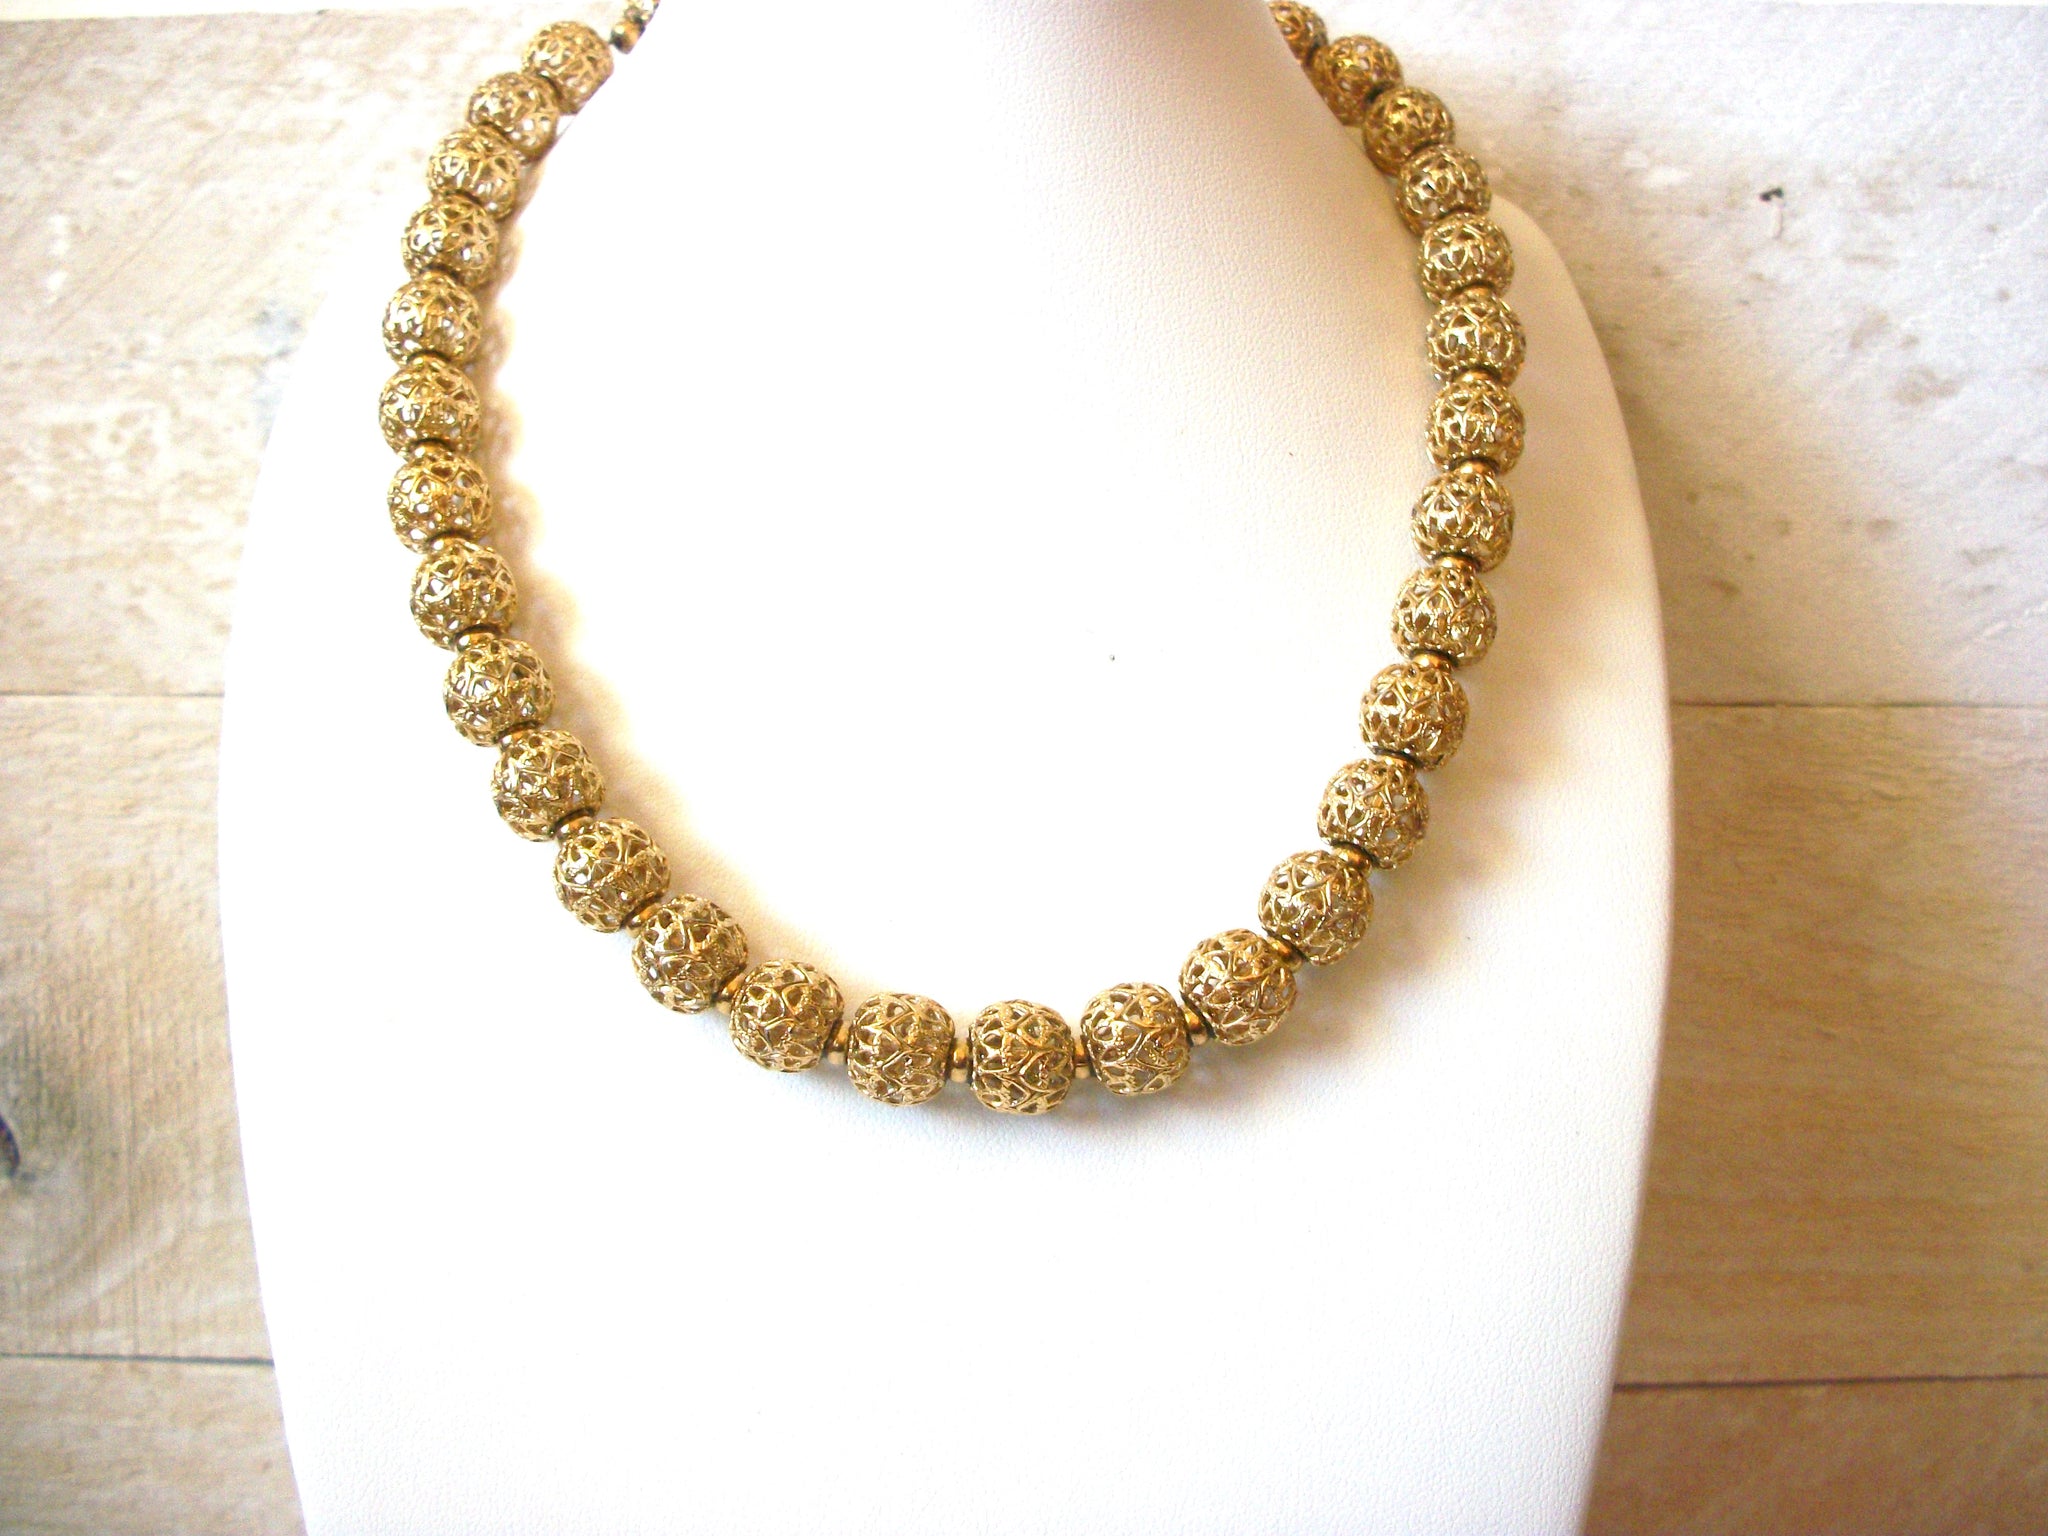 Monet Hallow Beads 16 Inch Necklace 41320